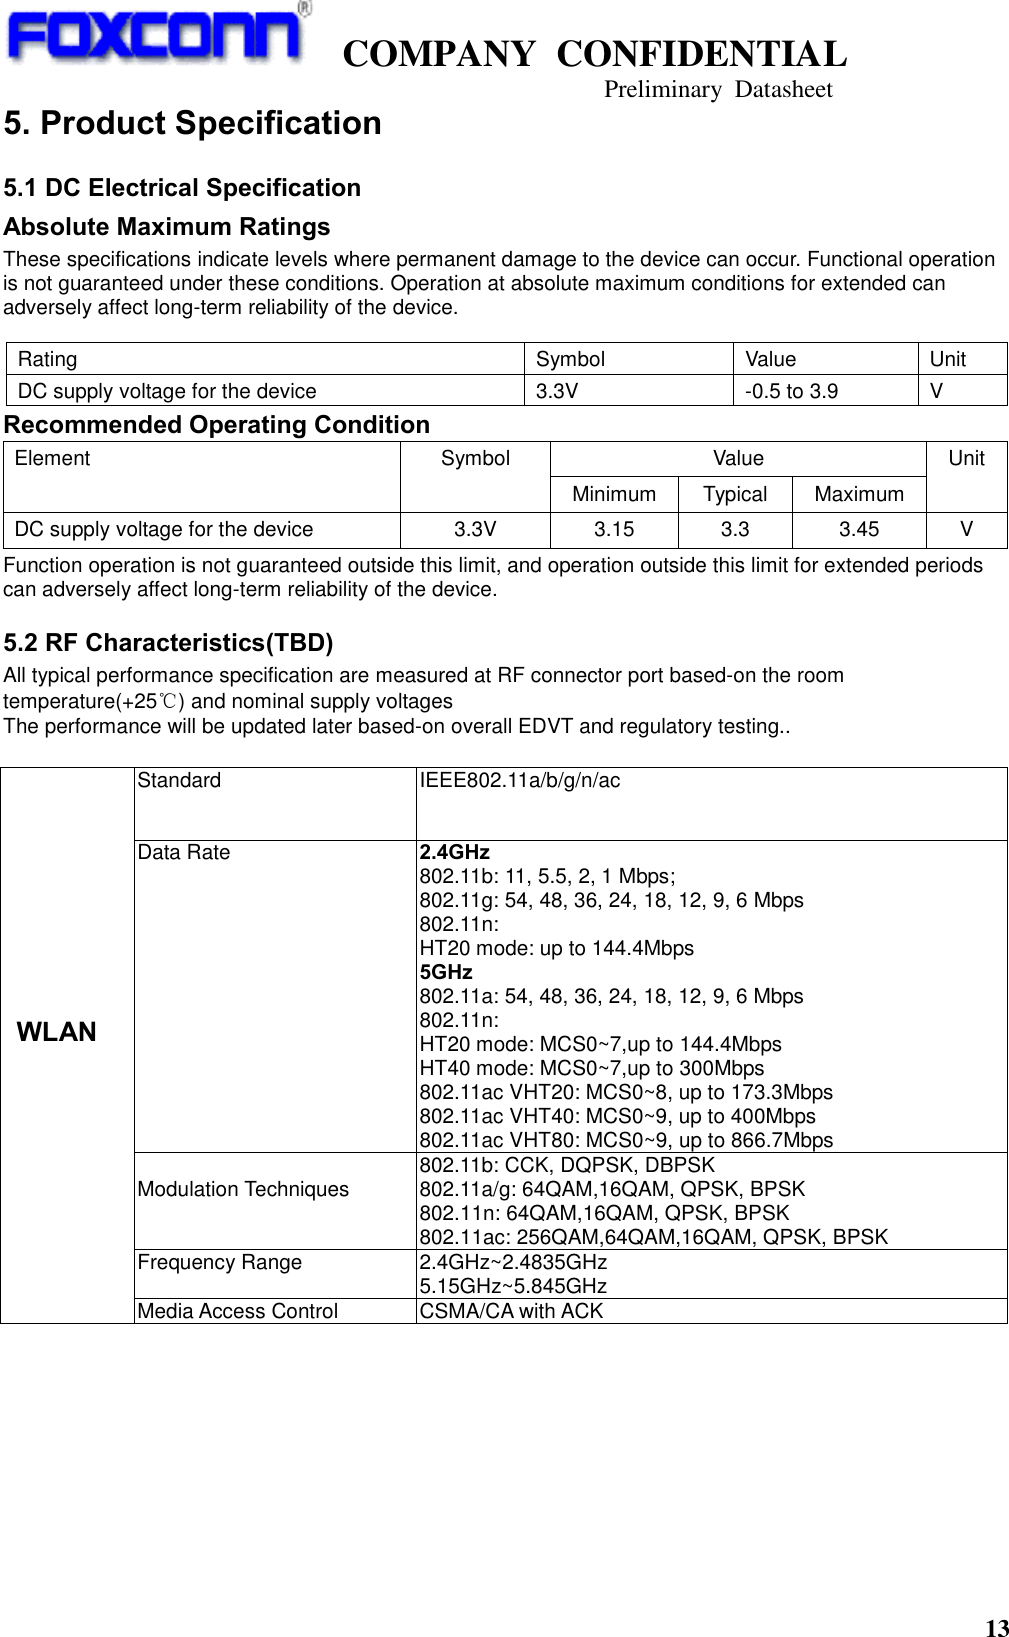   COMPANY  CONFIDENTIAL                                   Preliminary  Datasheet 13  5. Product Specification 5.1 DC Electrical Specification Absolute Maximum Ratings These specifications indicate levels where permanent damage to the device can occur. Functional operation is not guaranteed under these conditions. Operation at absolute maximum conditions for extended can adversely affect long-term reliability of the device. Recommended Operating Condition Element Symbol Value Unit Minimum Typical Maximum DC supply voltage for the device 3.3V 3.15 3.3 3.45 V Function operation is not guaranteed outside this limit, and operation outside this limit for extended periods can adversely affect long-term reliability of the device. 5.2 RF Characteristics(TBD) All typical performance specification are measured at RF connector port based-on the room temperature(+25℃) and nominal supply voltages   The performance will be updated later based-on overall EDVT and regulatory testing..          WLAN Standard IEEE802.11a/b/g/n/ac Data Rate   2.4GHz 802.11b: 11, 5.5, 2, 1 Mbps; 802.11g: 54, 48, 36, 24, 18, 12, 9, 6 Mbps 802.11n:   HT20 mode: up to 144.4Mbps 5GHz 802.11a: 54, 48, 36, 24, 18, 12, 9, 6 Mbps 802.11n:   HT20 mode: MCS0~7,up to 144.4Mbps HT40 mode: MCS0~7,up to 300Mbps 802.11ac VHT20: MCS0~8, up to 173.3Mbps 802.11ac VHT40: MCS0~9, up to 400Mbps 802.11ac VHT80: MCS0~9, up to 866.7Mbps  Modulation Techniques 802.11b: CCK, DQPSK, DBPSK 802.11a/g: 64QAM,16QAM, QPSK, BPSK 802.11n: 64QAM,16QAM, QPSK, BPSK 802.11ac: 256QAM,64QAM,16QAM, QPSK, BPSK Frequency Range    2.4GHz~2.4835GHz 5.15GHz~5.845GHz Media Access Control CSMA/CA with ACK Rating Symbol Value Unit DC supply voltage for the device 3.3V -0.5 to 3.9 V 